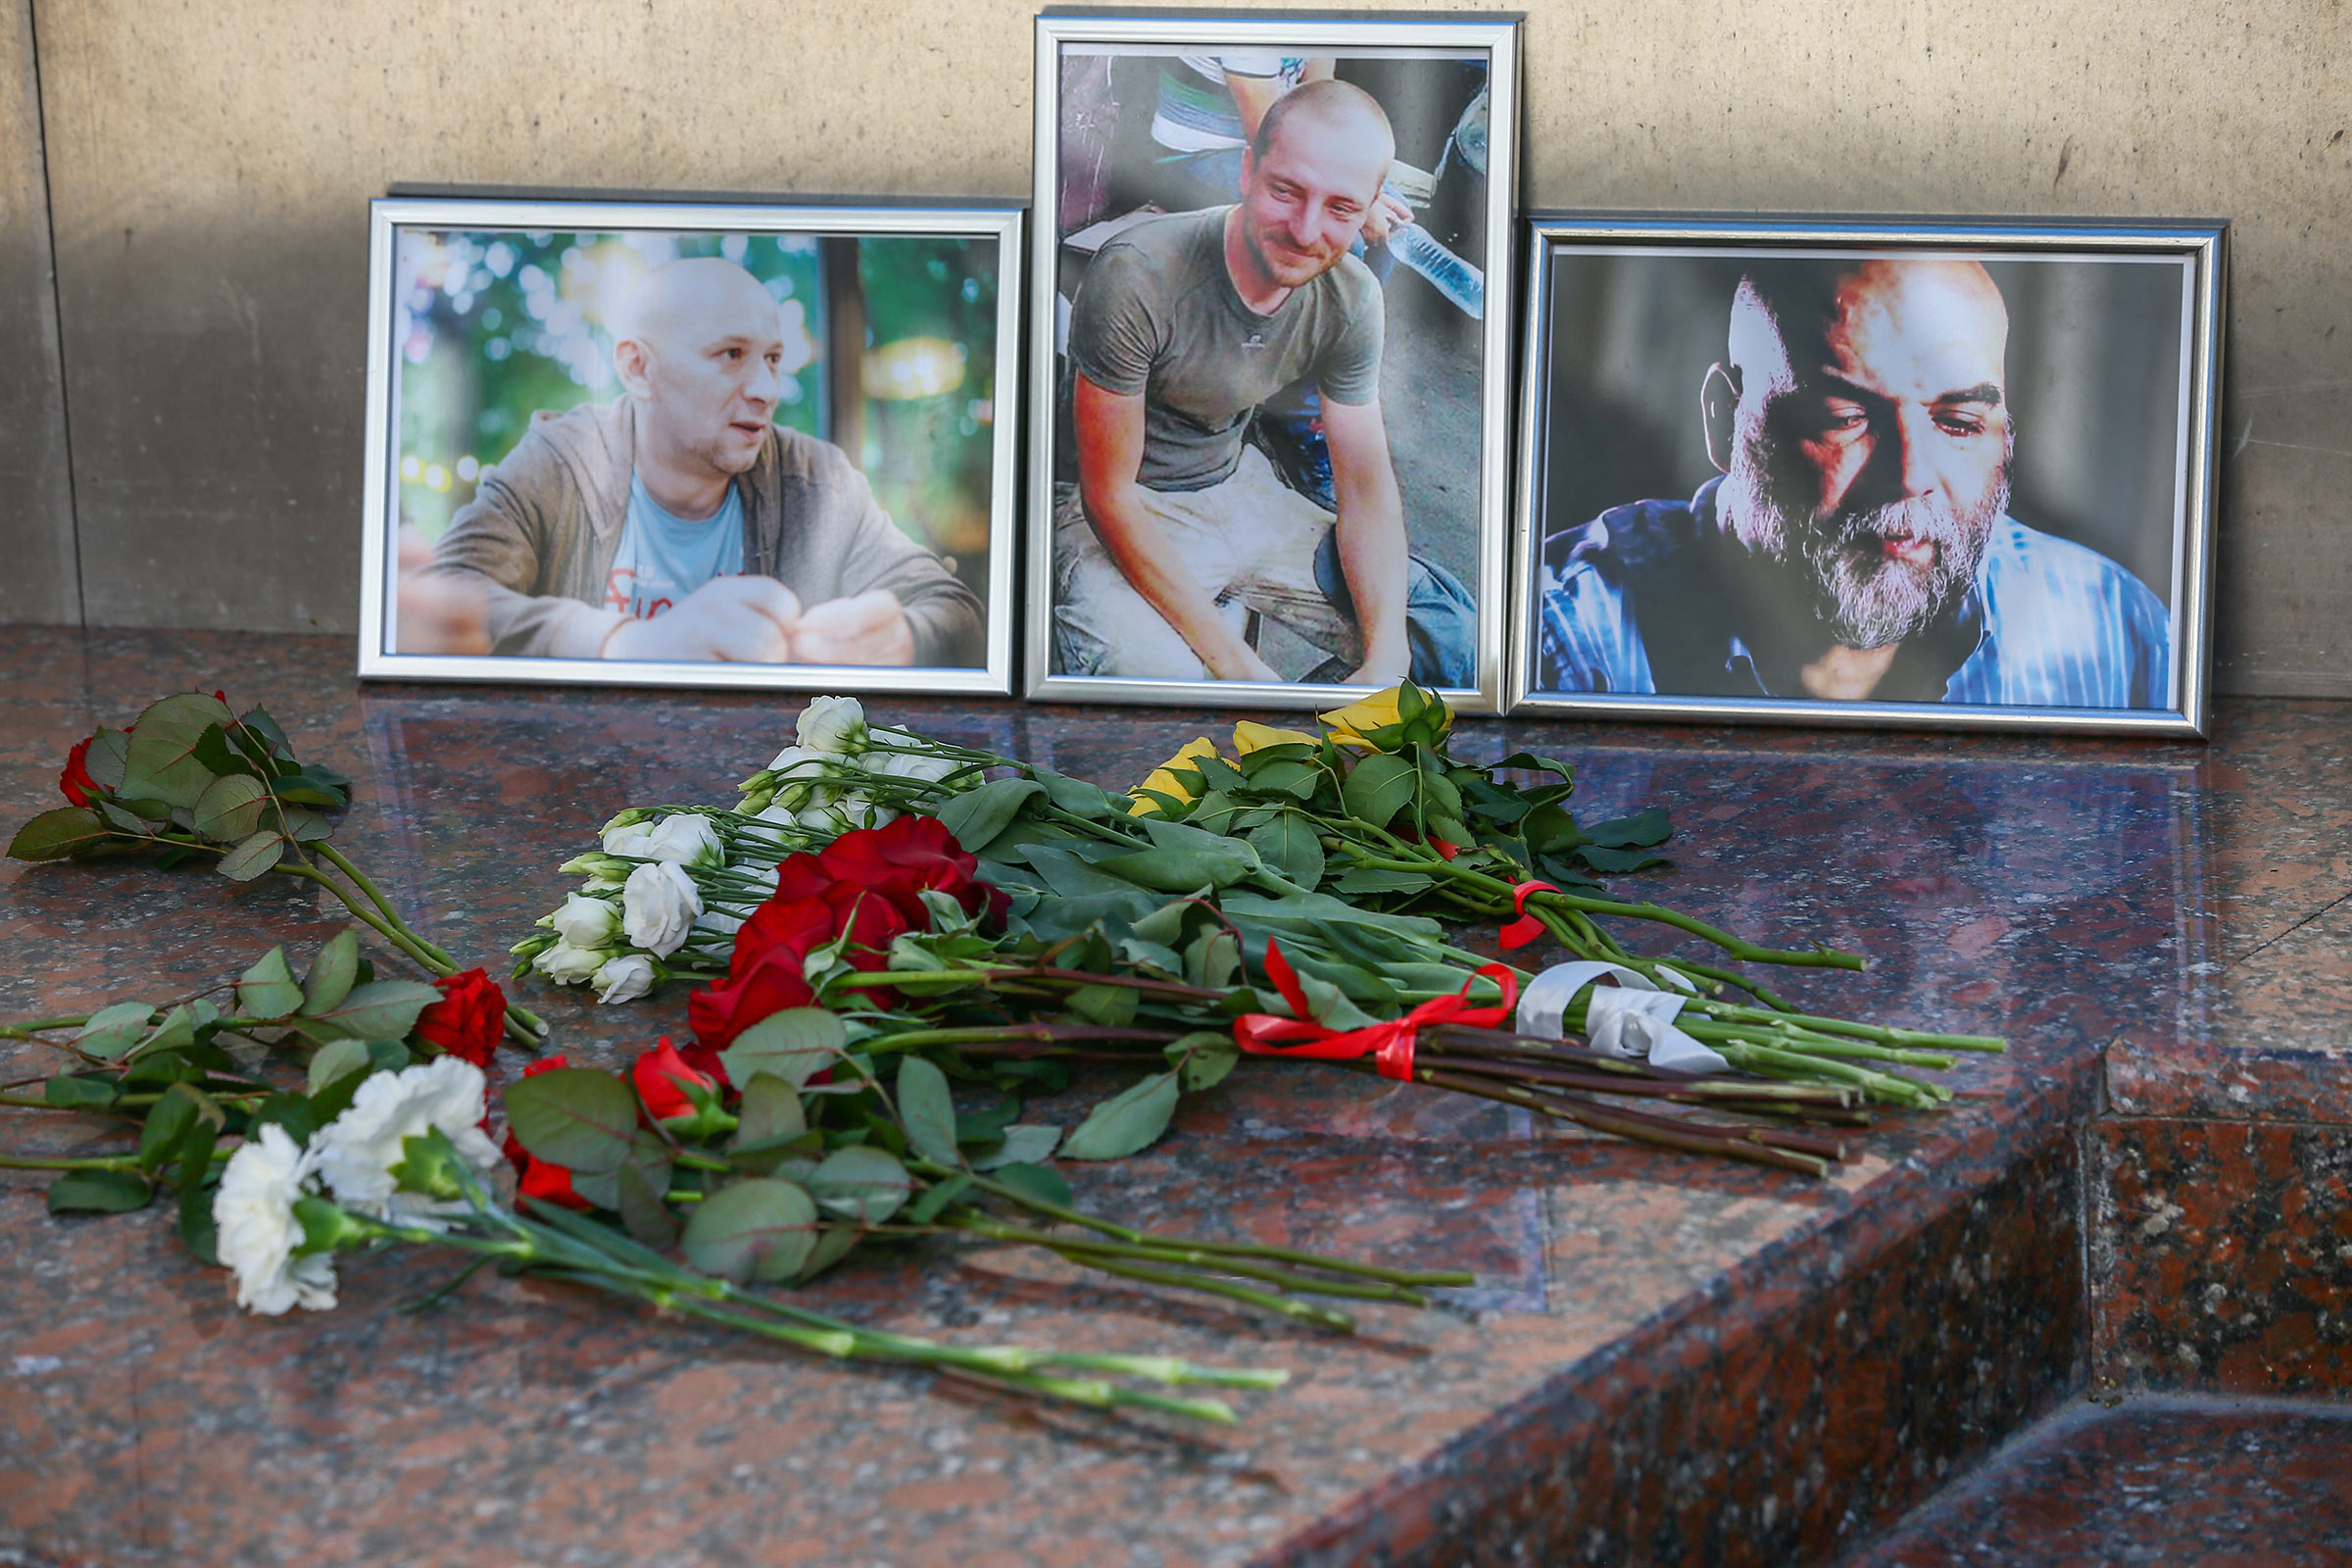 A tribute to the three Russian journalists killed in the Central African Republic (CAR), journalist Orkhan Dzhemal, cameraman Kirill Radchenko, and producer Alexander Rastorguyev, is seen at the Central House of Journalists in Moscow on August 1, 2018. (Alexander Shcherbak—TASS/Getty Images)